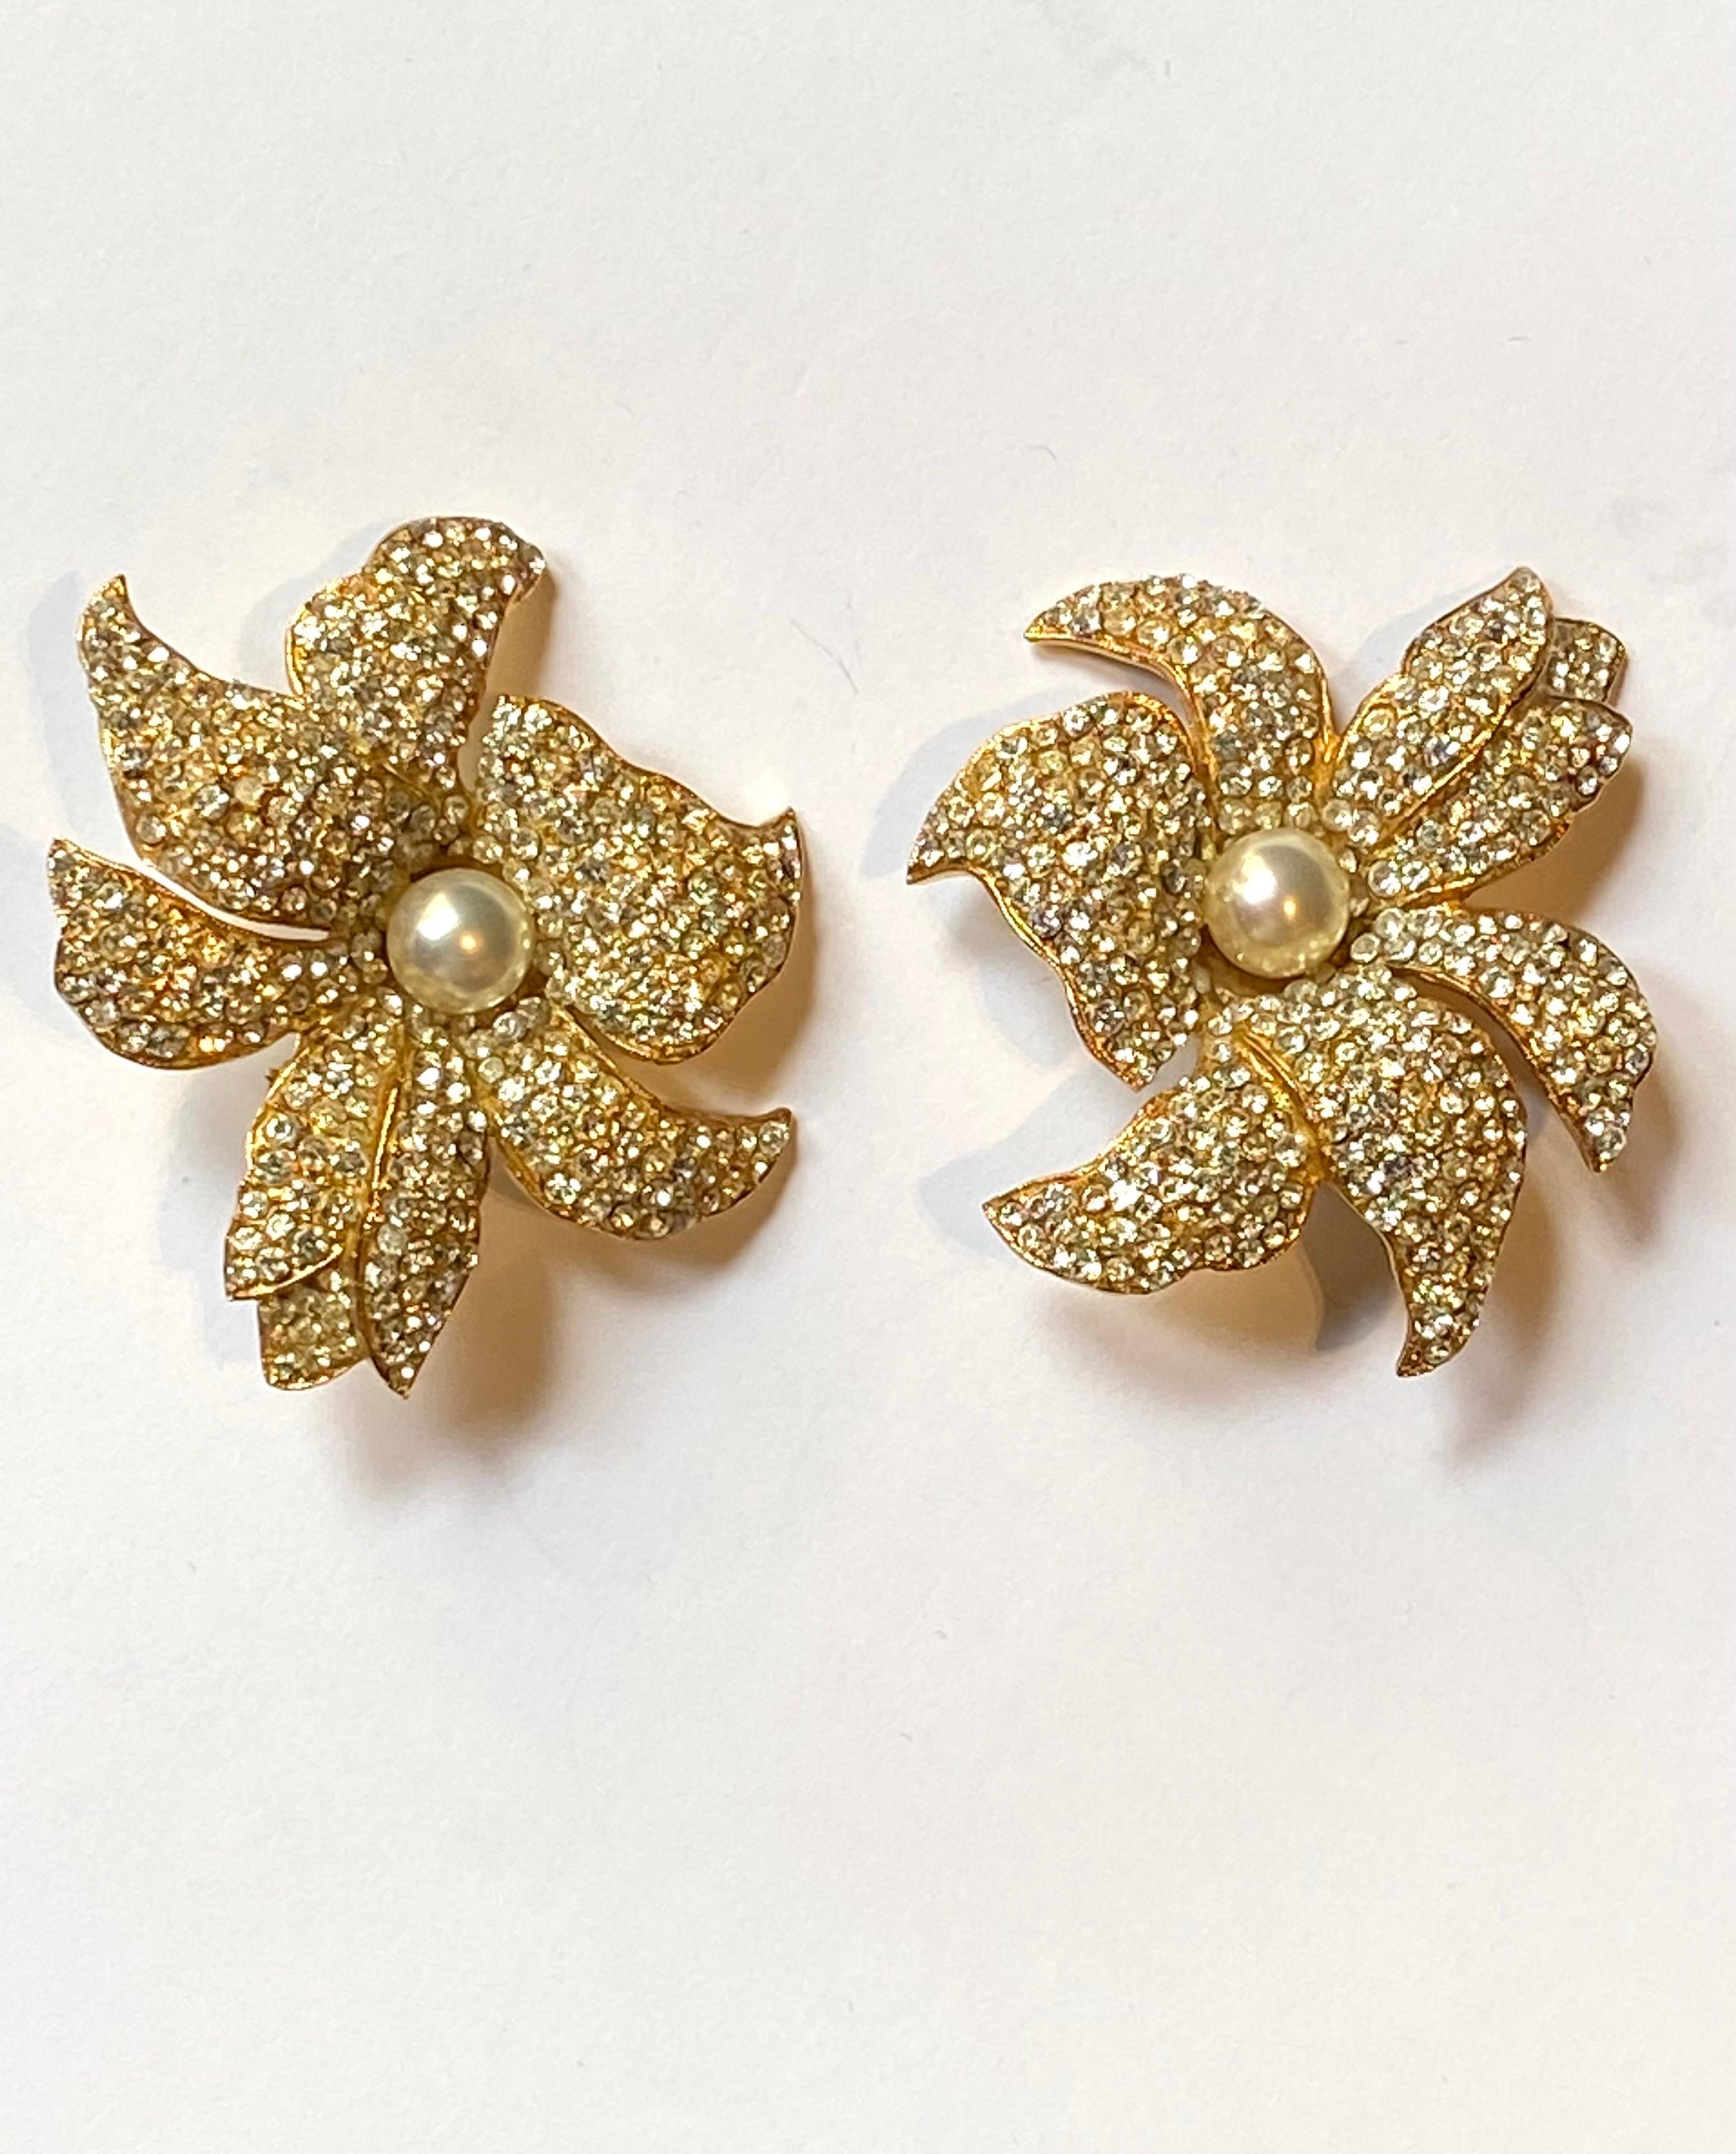 Borbonese, Italy Gold with Pave' Rhinestone Large Flower Earrings 7